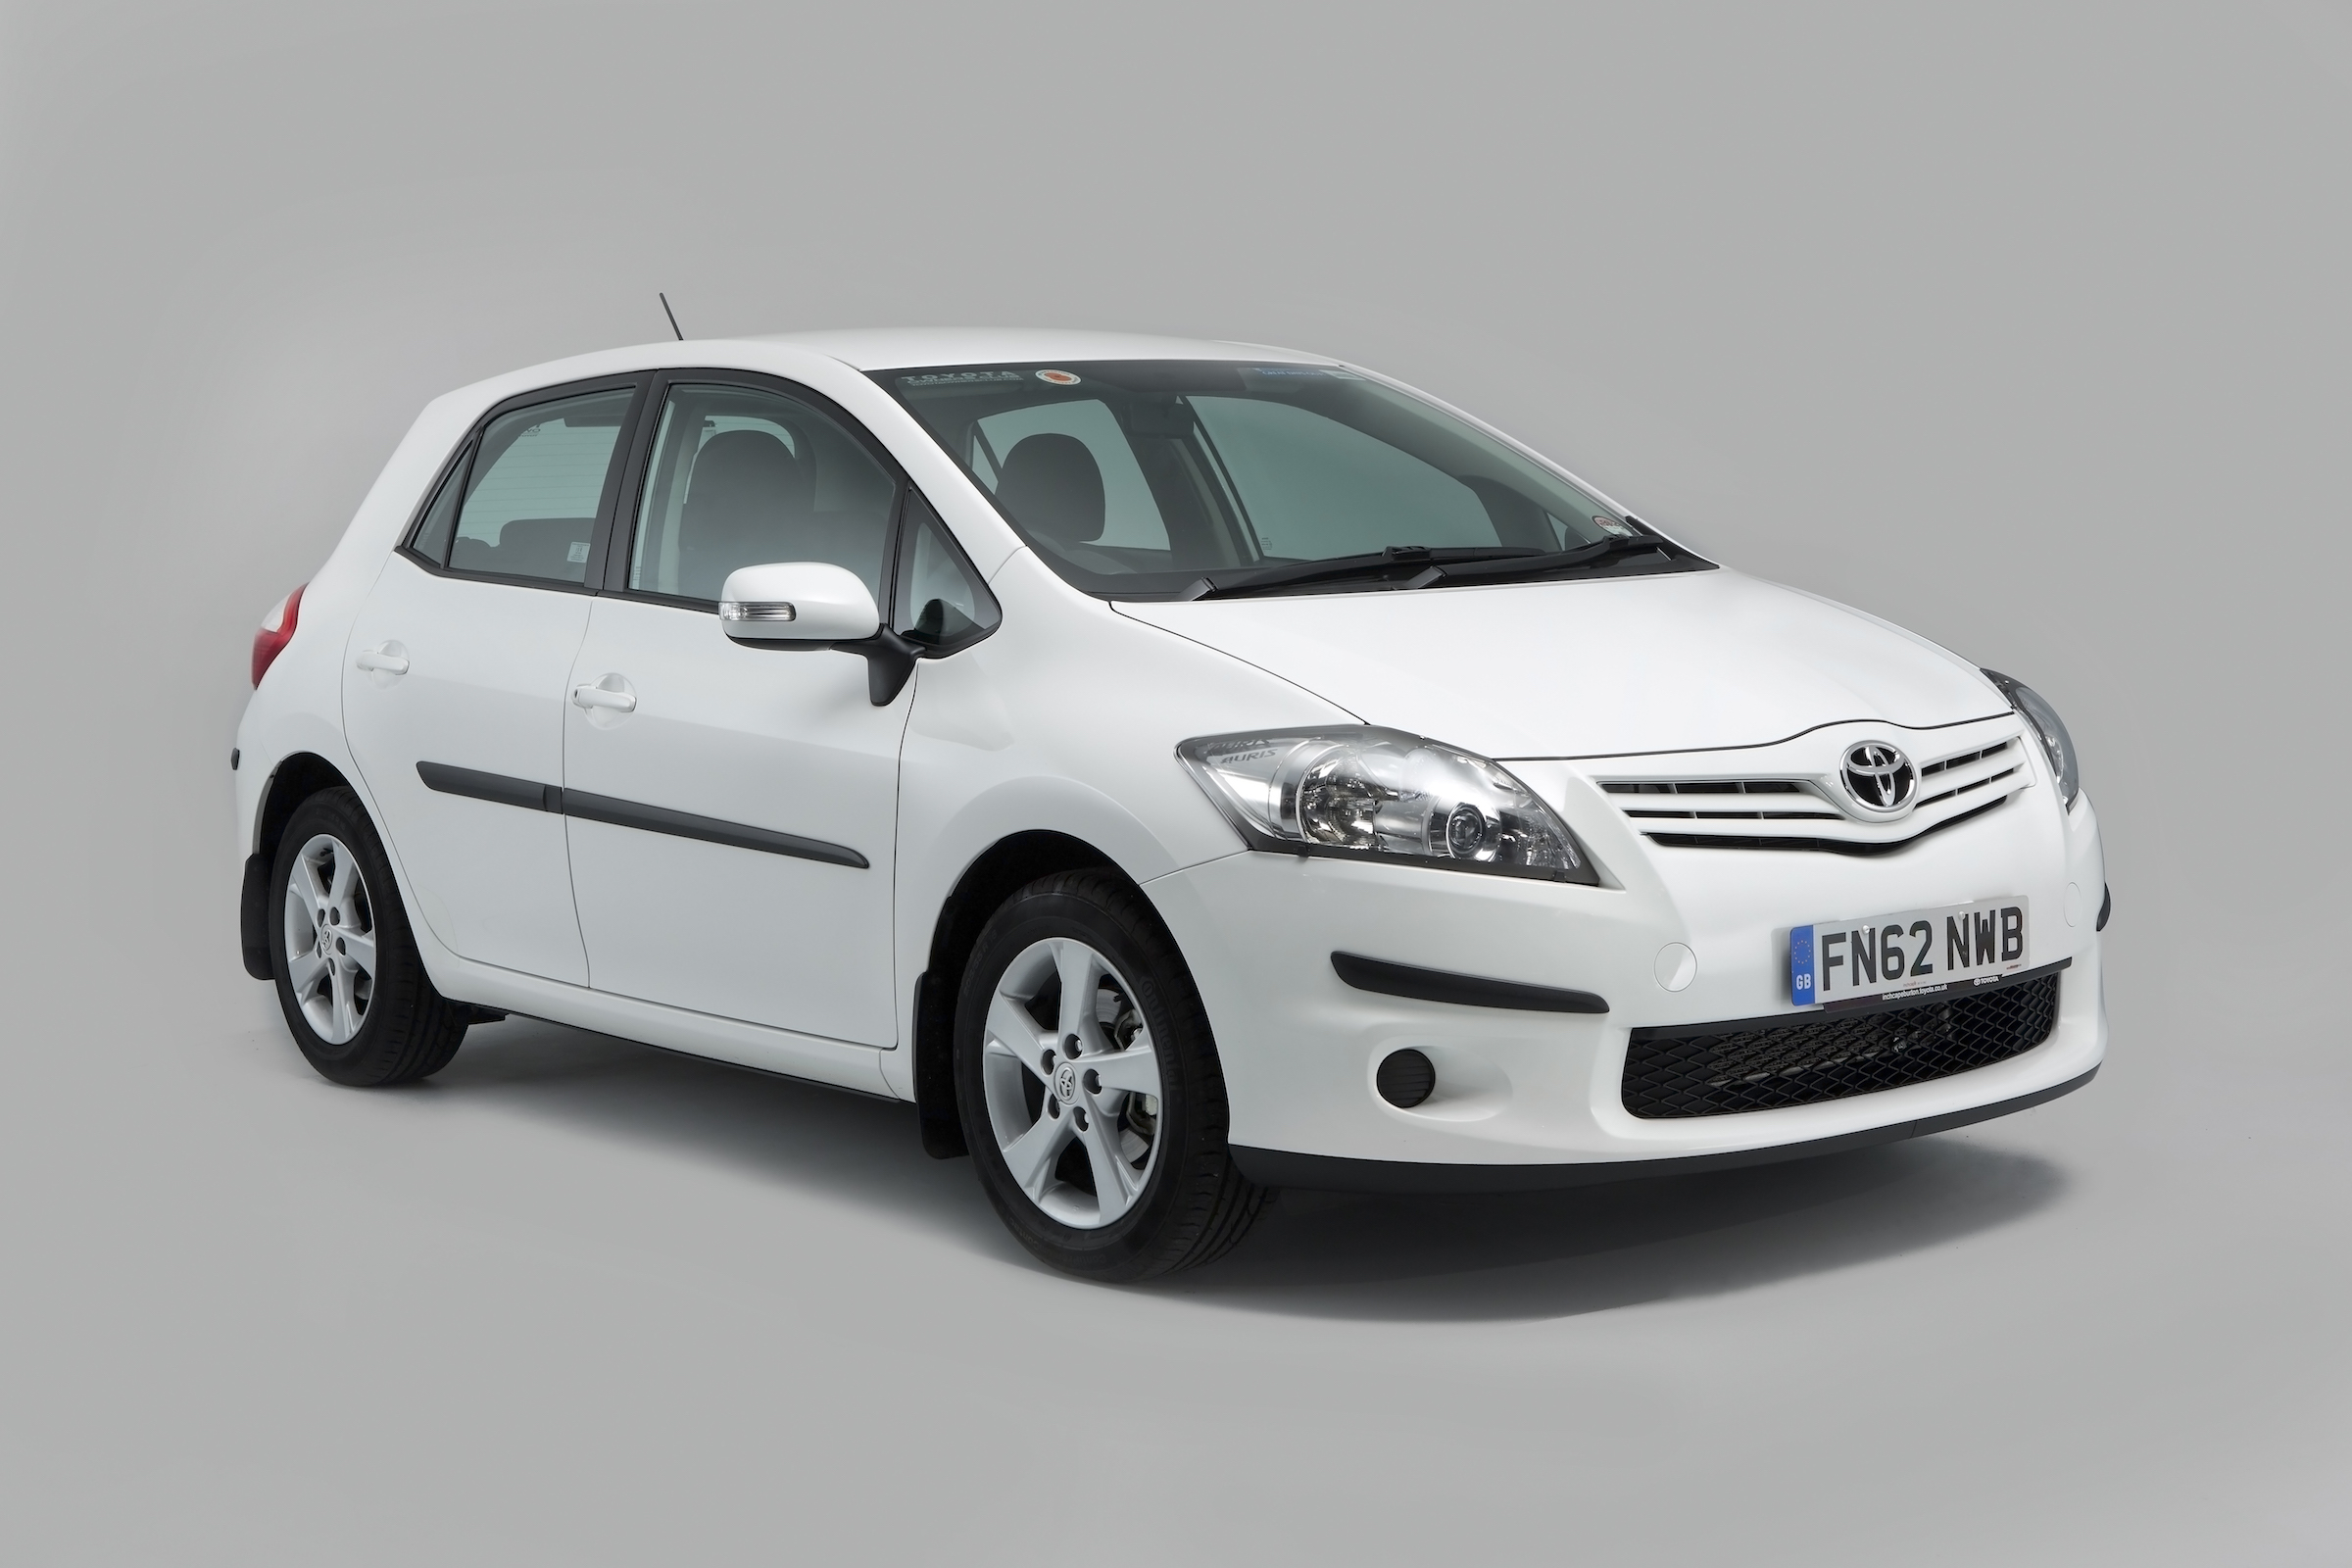 Used Toyota Auris buying guide 20072012 (Mk1) Carbuyer